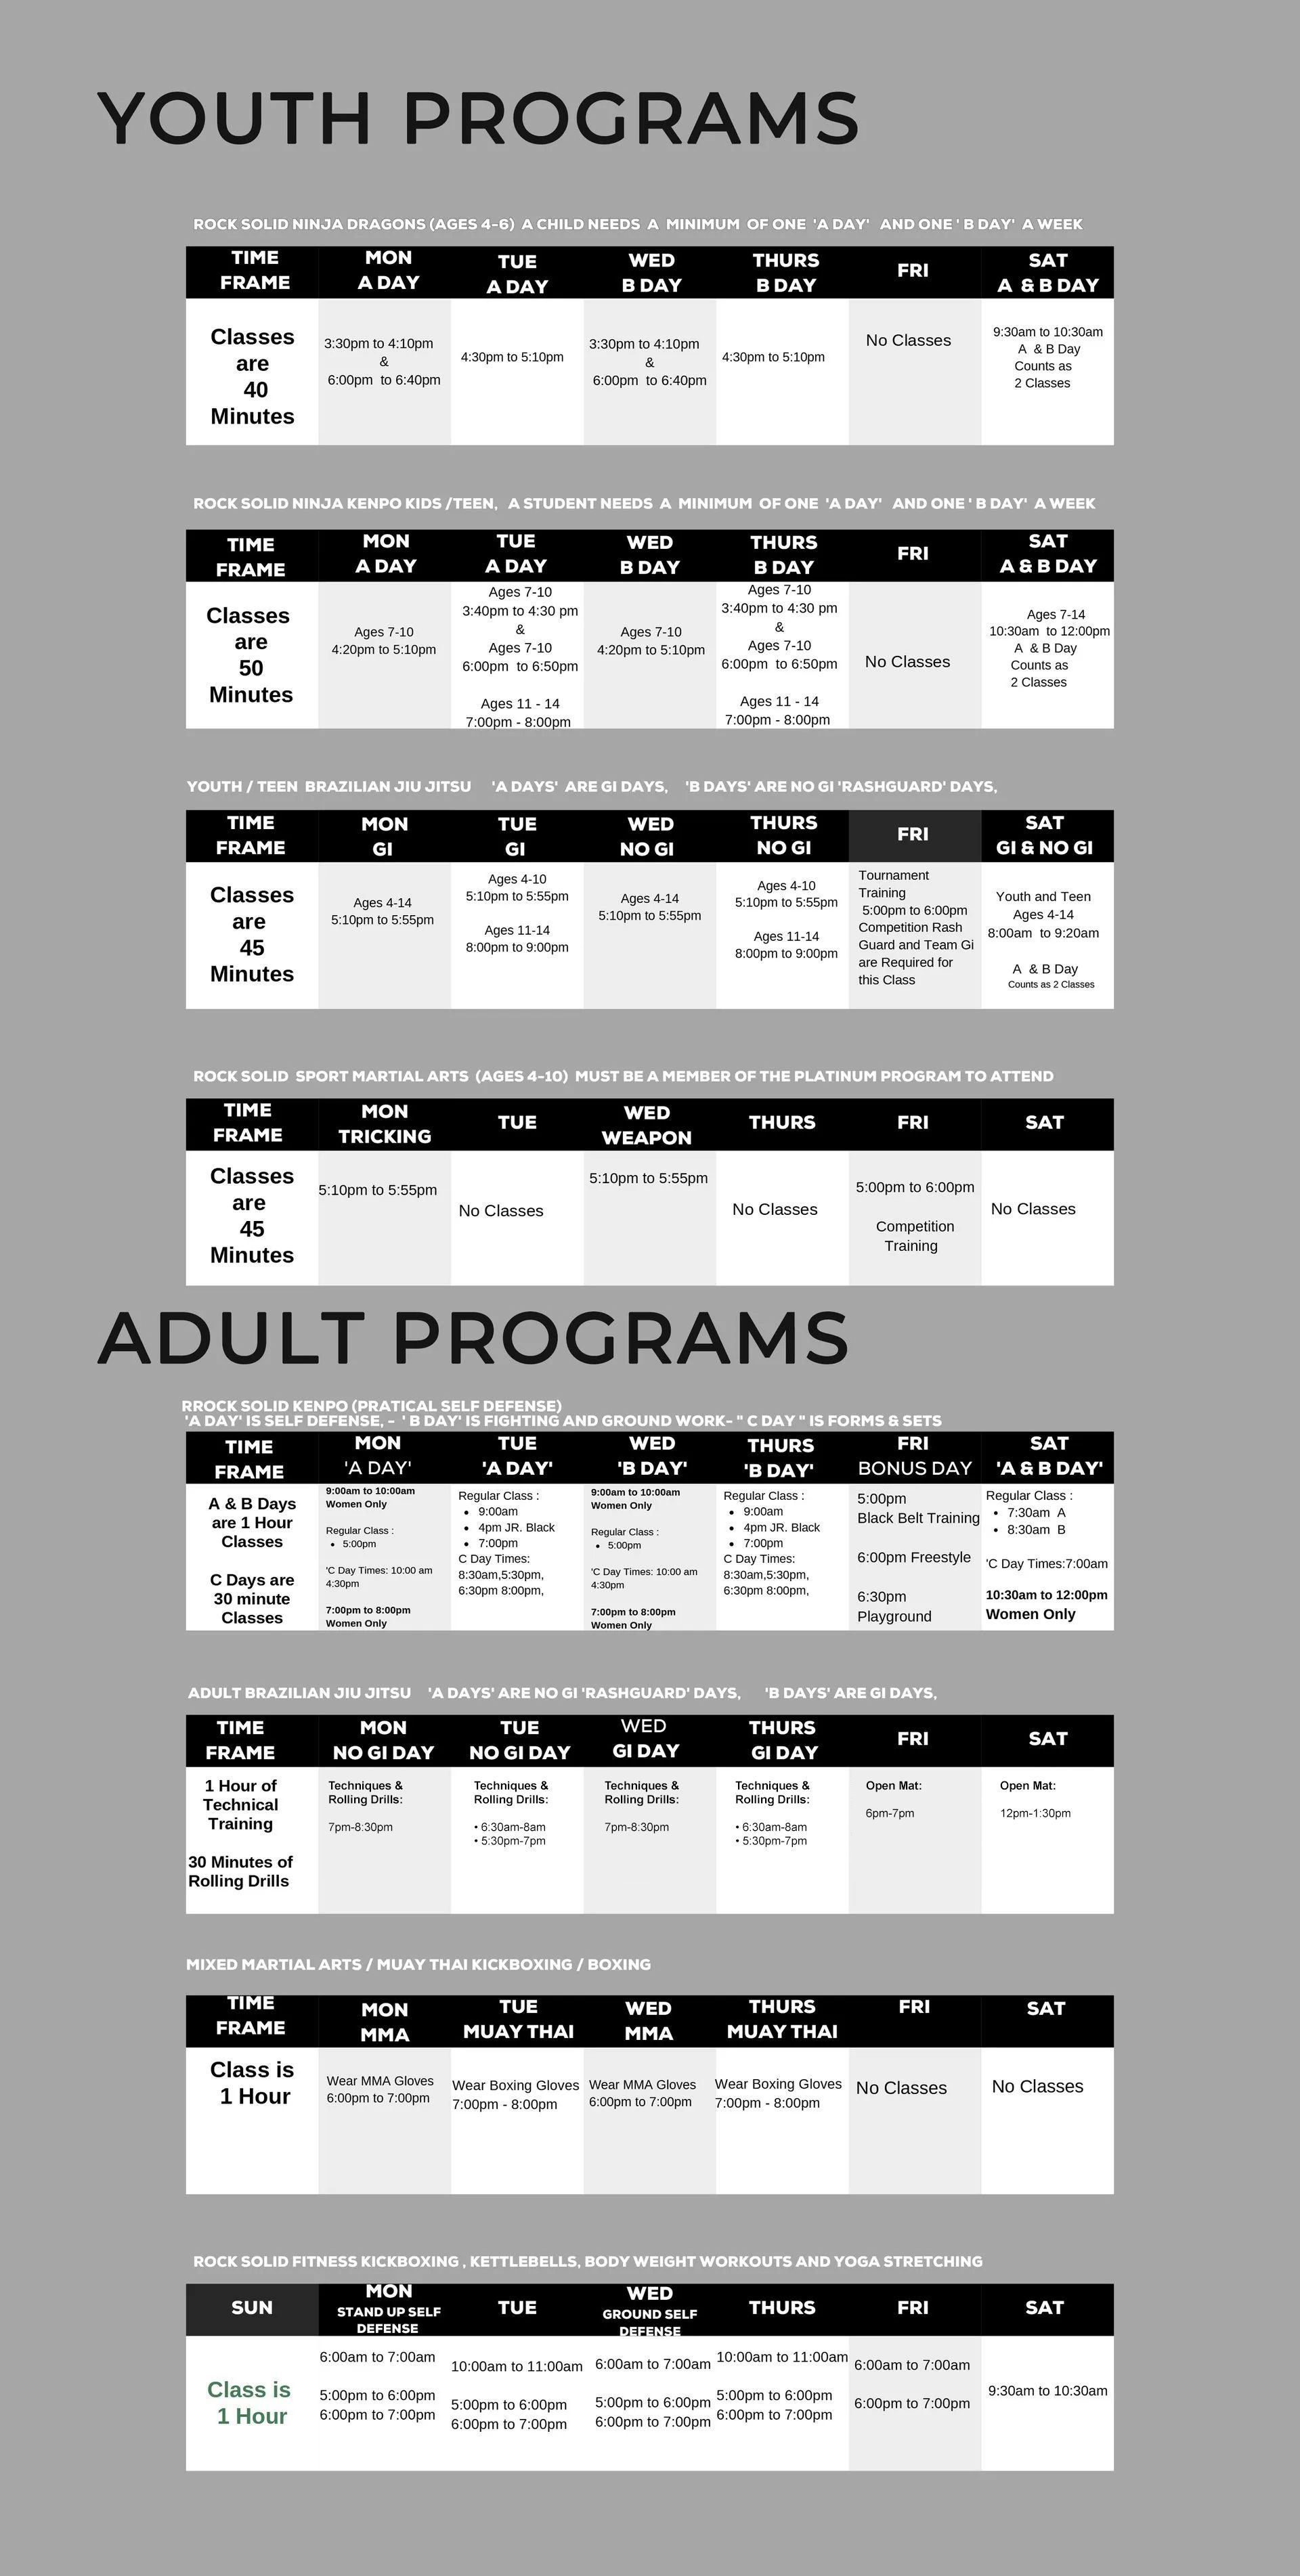 A list of youth programs and adult programs on a gray background.